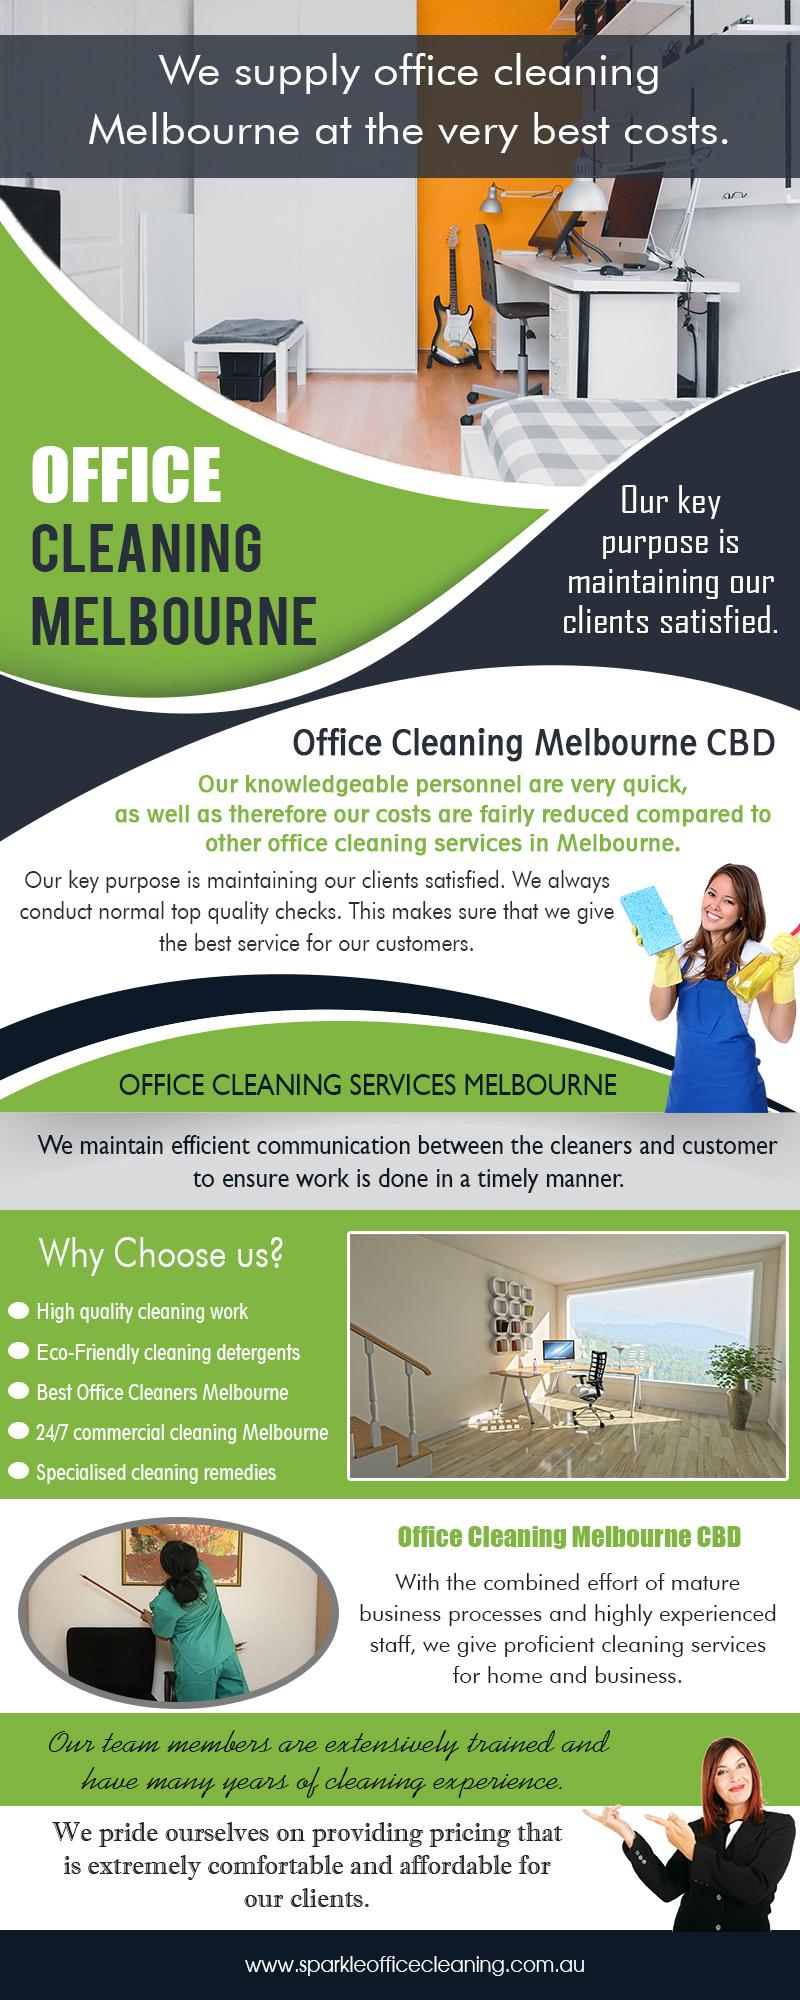 Office Cleaning Melbourne | sparkleofficecleaning.com.au